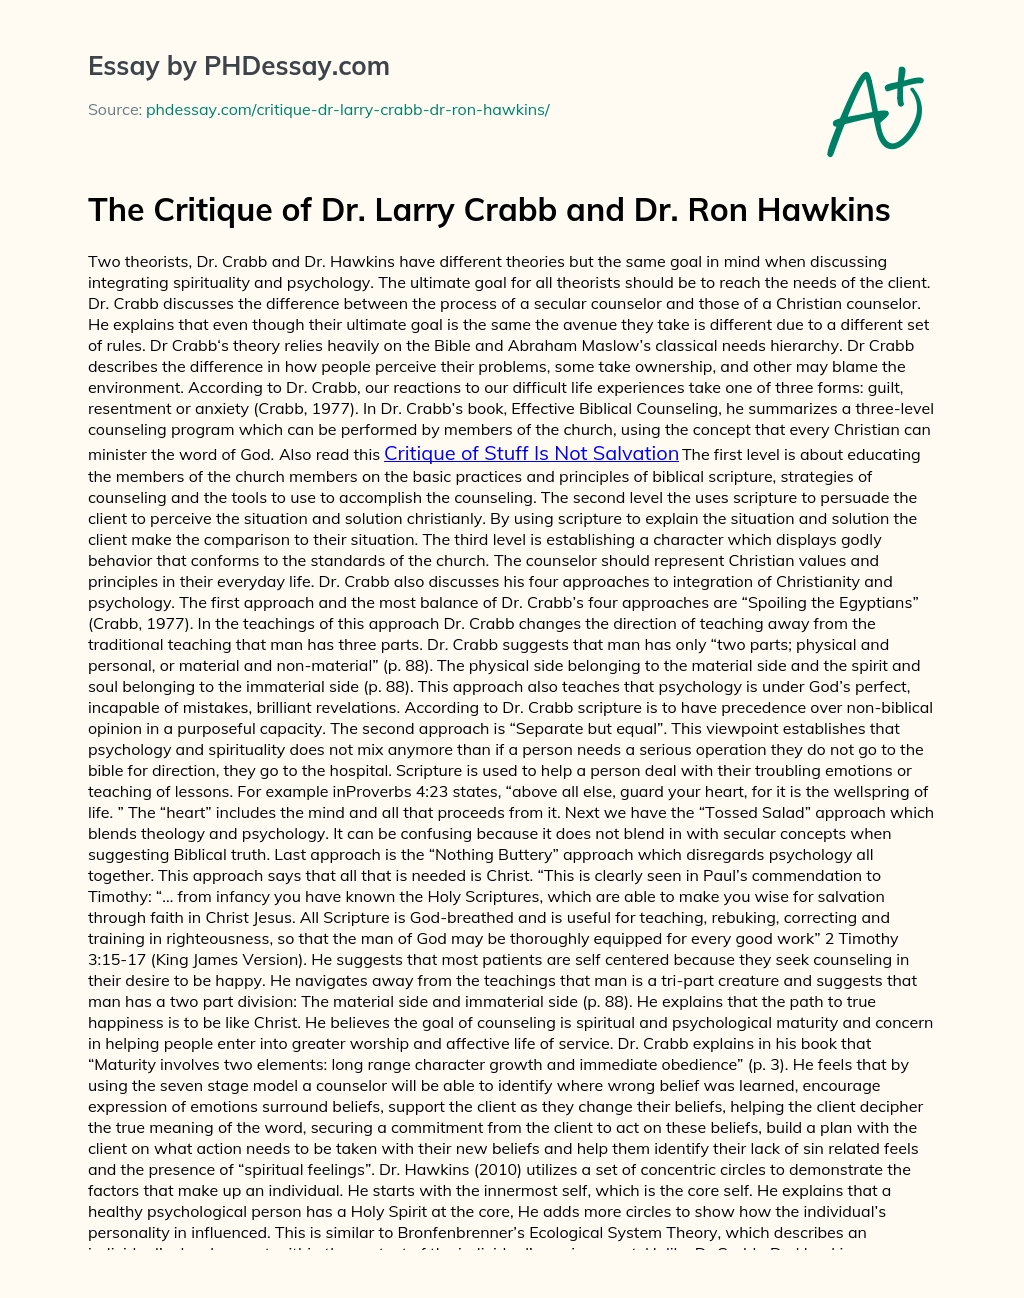 The Critique of Dr. Larry Crabb and Dr. Ron Hawkins essay